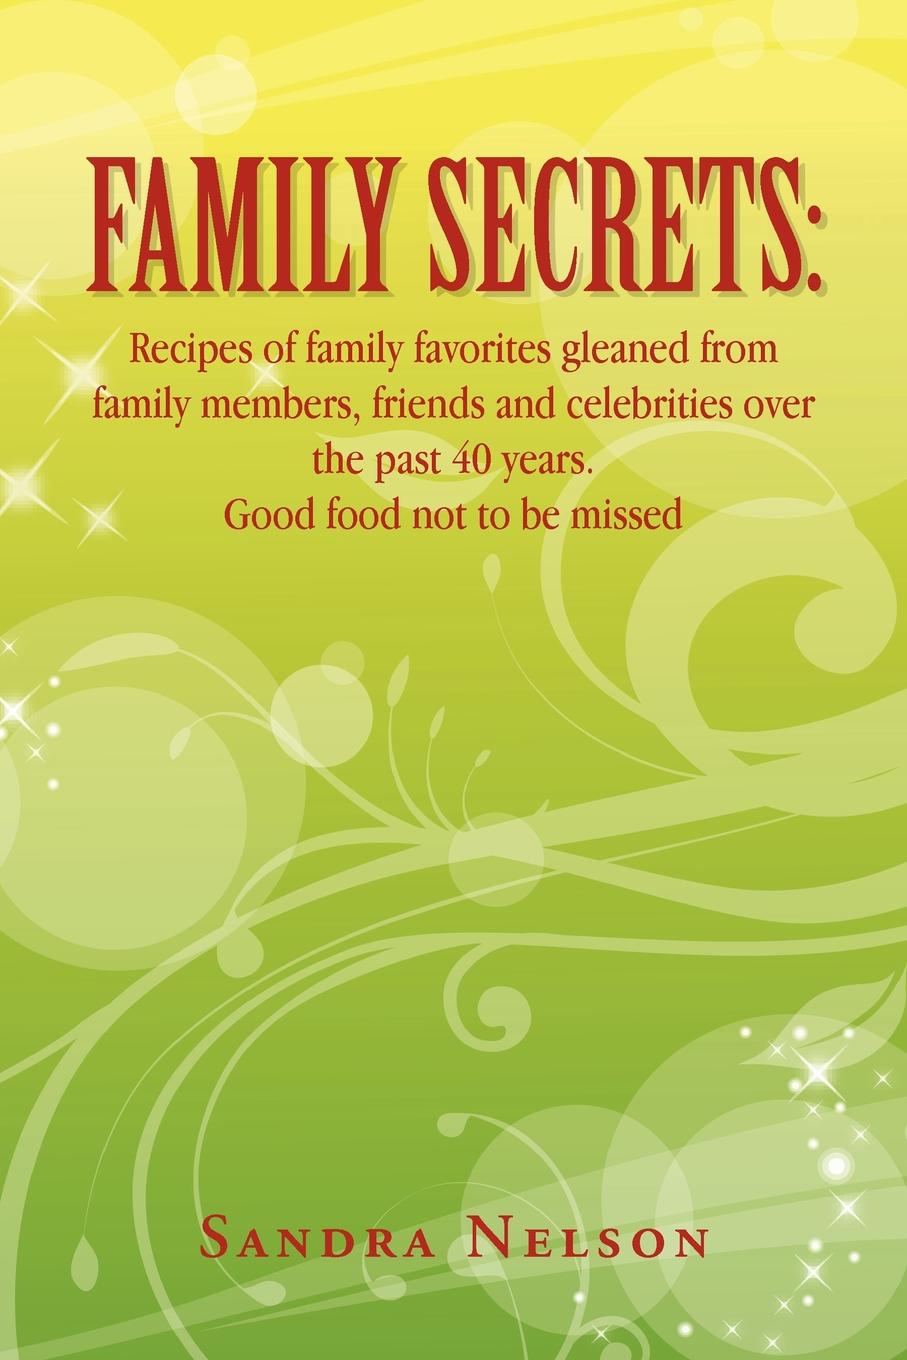 Family Secrets. Recipes of Family Favorites Gleaned from Family Members, Friends and Celebrities Over the Past 40 Years. Good Food Not